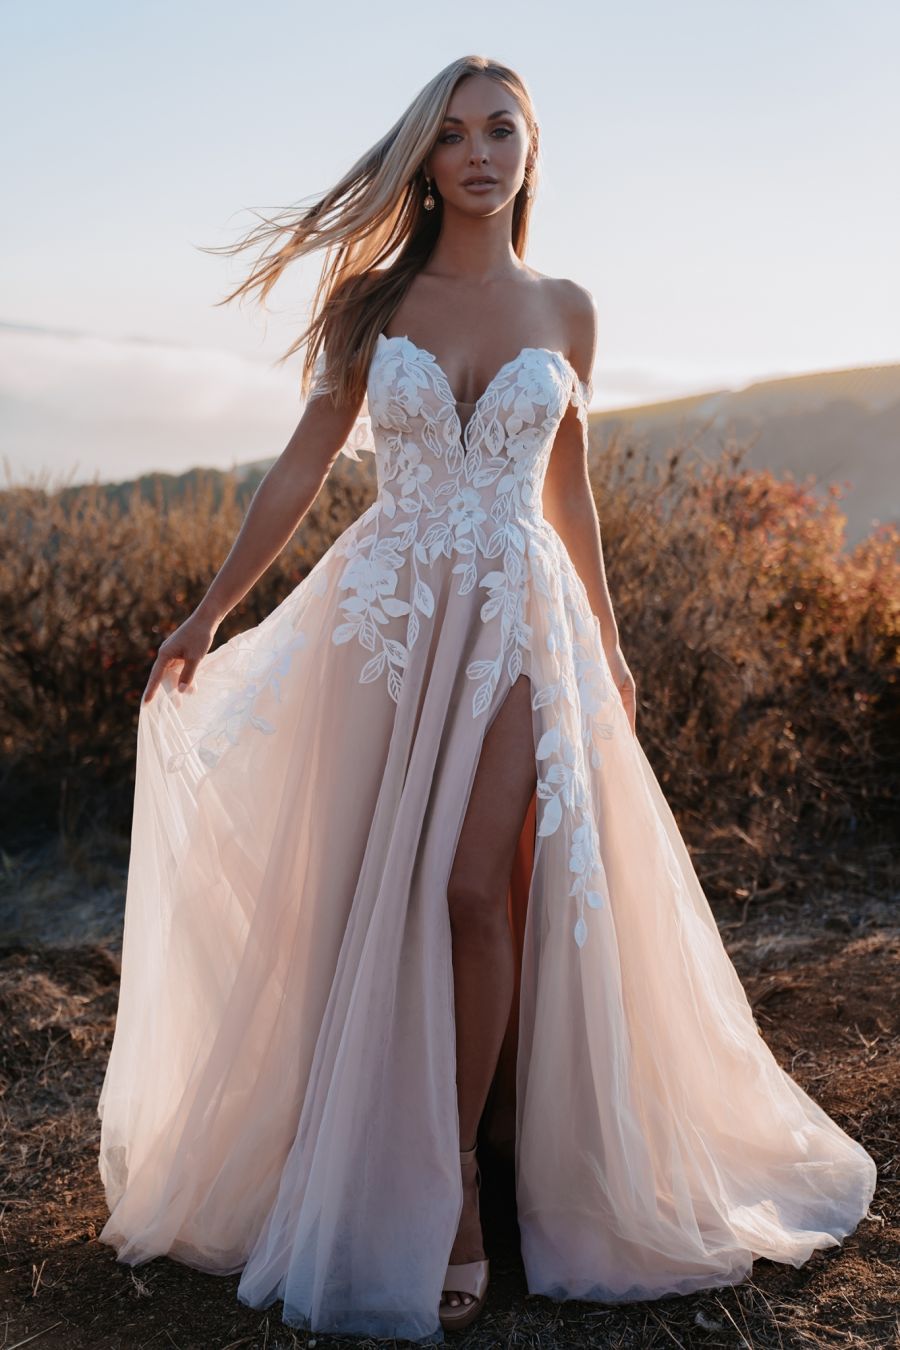 The 10 Most Romantic Wedding Gowns Ever! - Vows Bridal